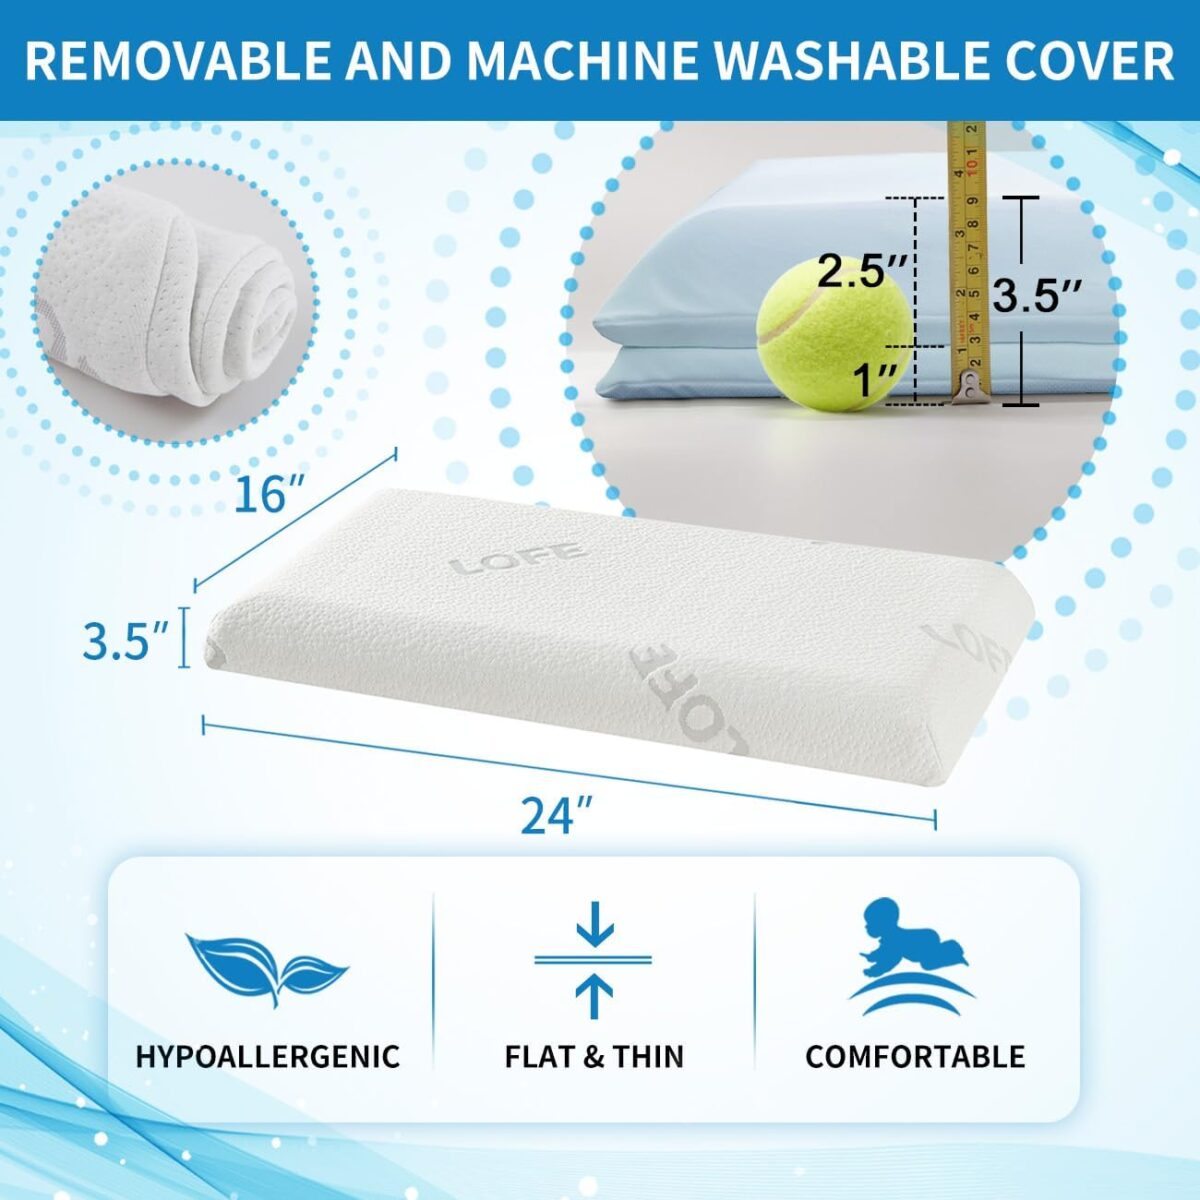 Flat Pillow - Adjustable Flat Pillows for Sleeping, 3 Heights of Flat Pillow Provide More Support for Neck Pain Relief, CertiPUR-US Soft Memory Foam Thin Pillow for Stomach/Side/Back Sleeper